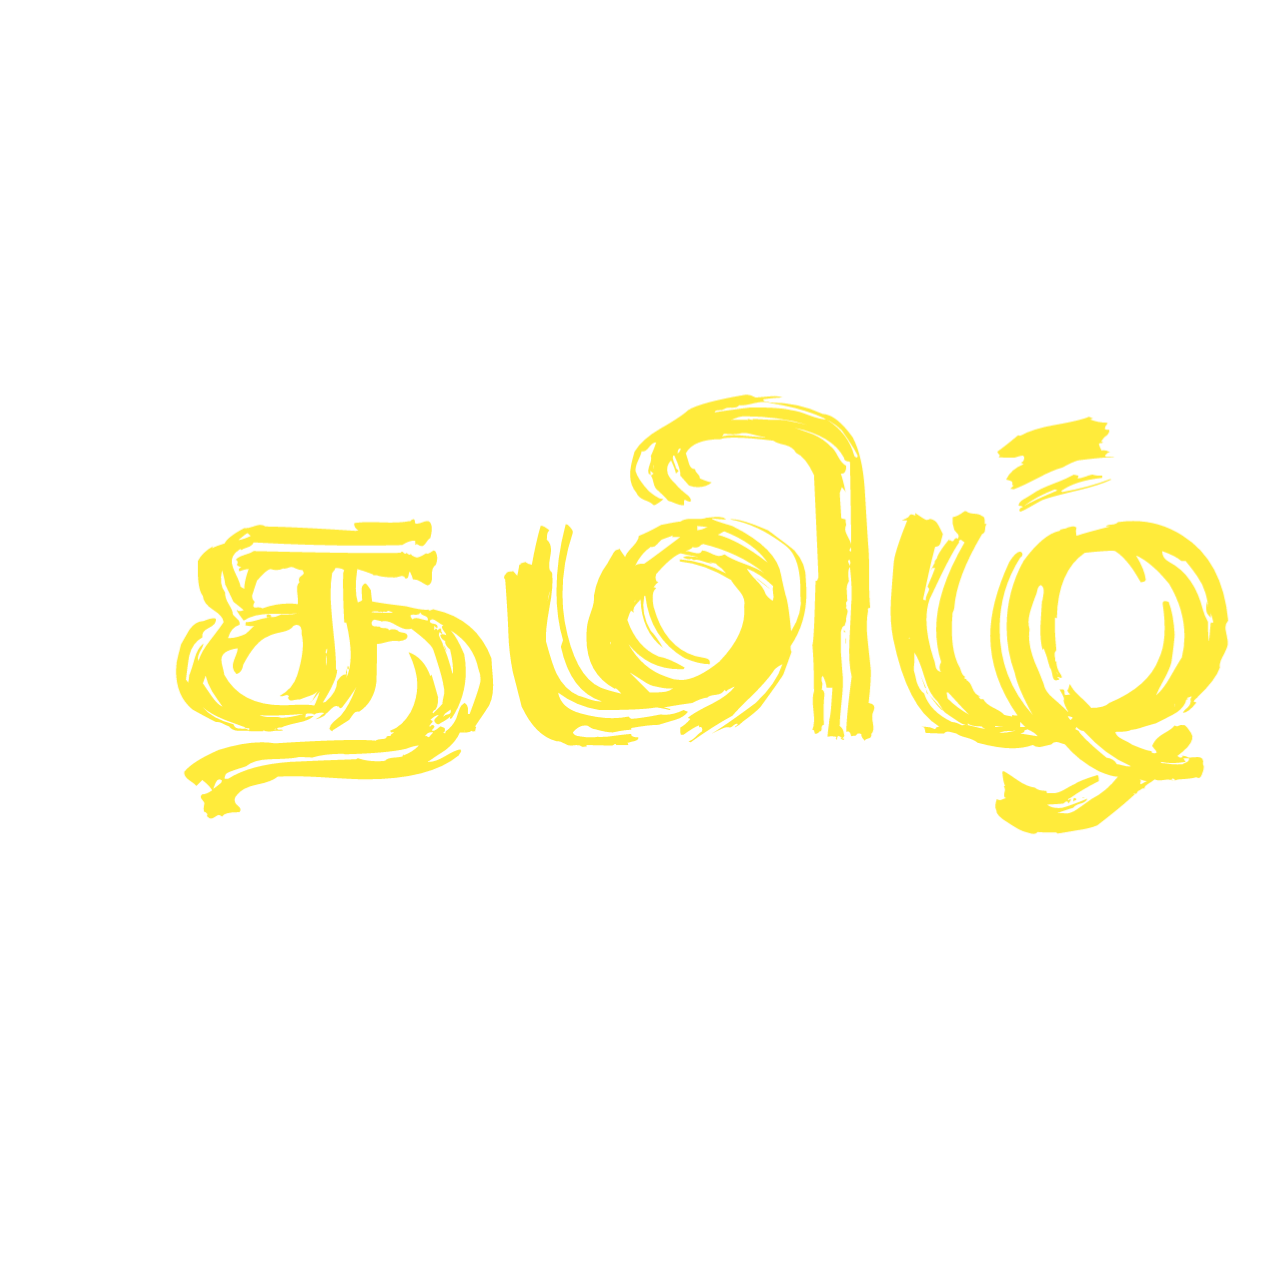 Download Tamil font ttf collection 23- download free tamil fonts_ stylish tamil fonts